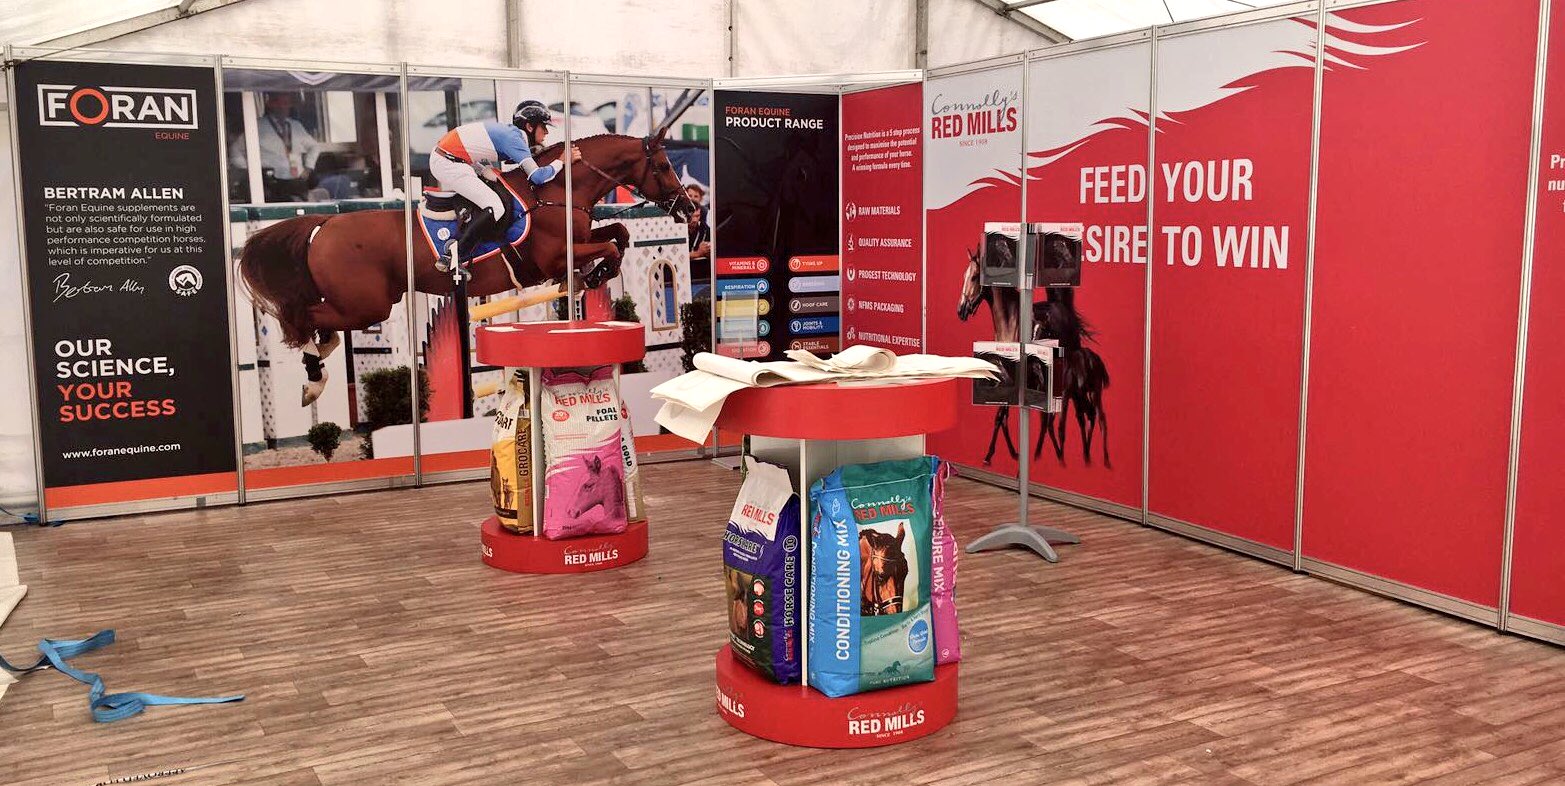 Uretfærdighed global Pompeji Connolly's RED MILLS on Twitter: "Fab blue skies @balmoralshow today. Our  team have been busy putting final touches to our stand - come say hello  from Wednesday STAND B38 ☀️ https://t.co/00kLIVqsck" /